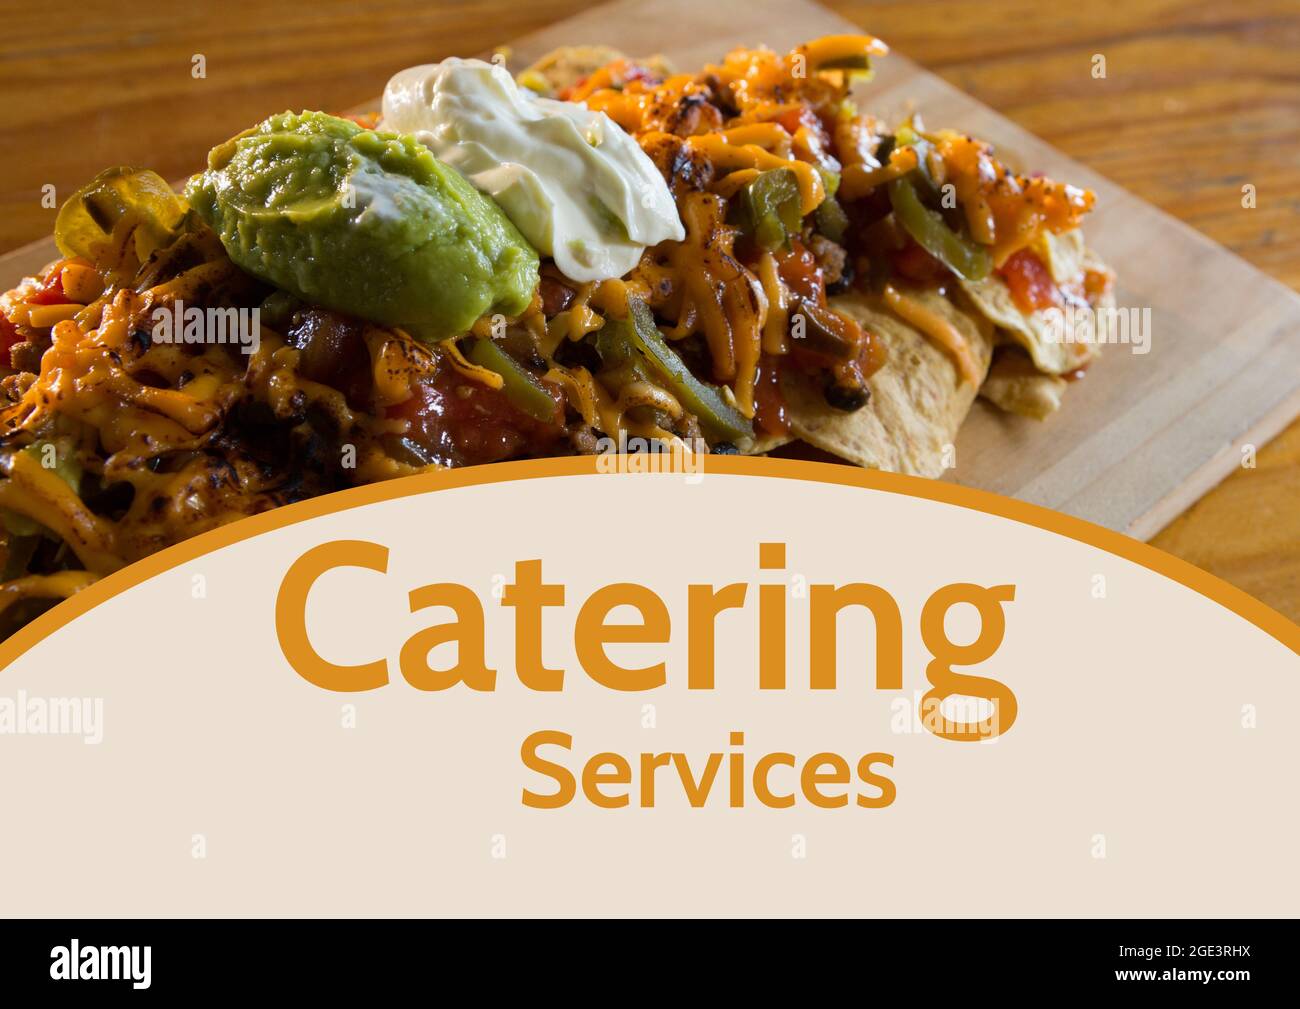 Composition of catering services text over food on wooden table Stock Photo